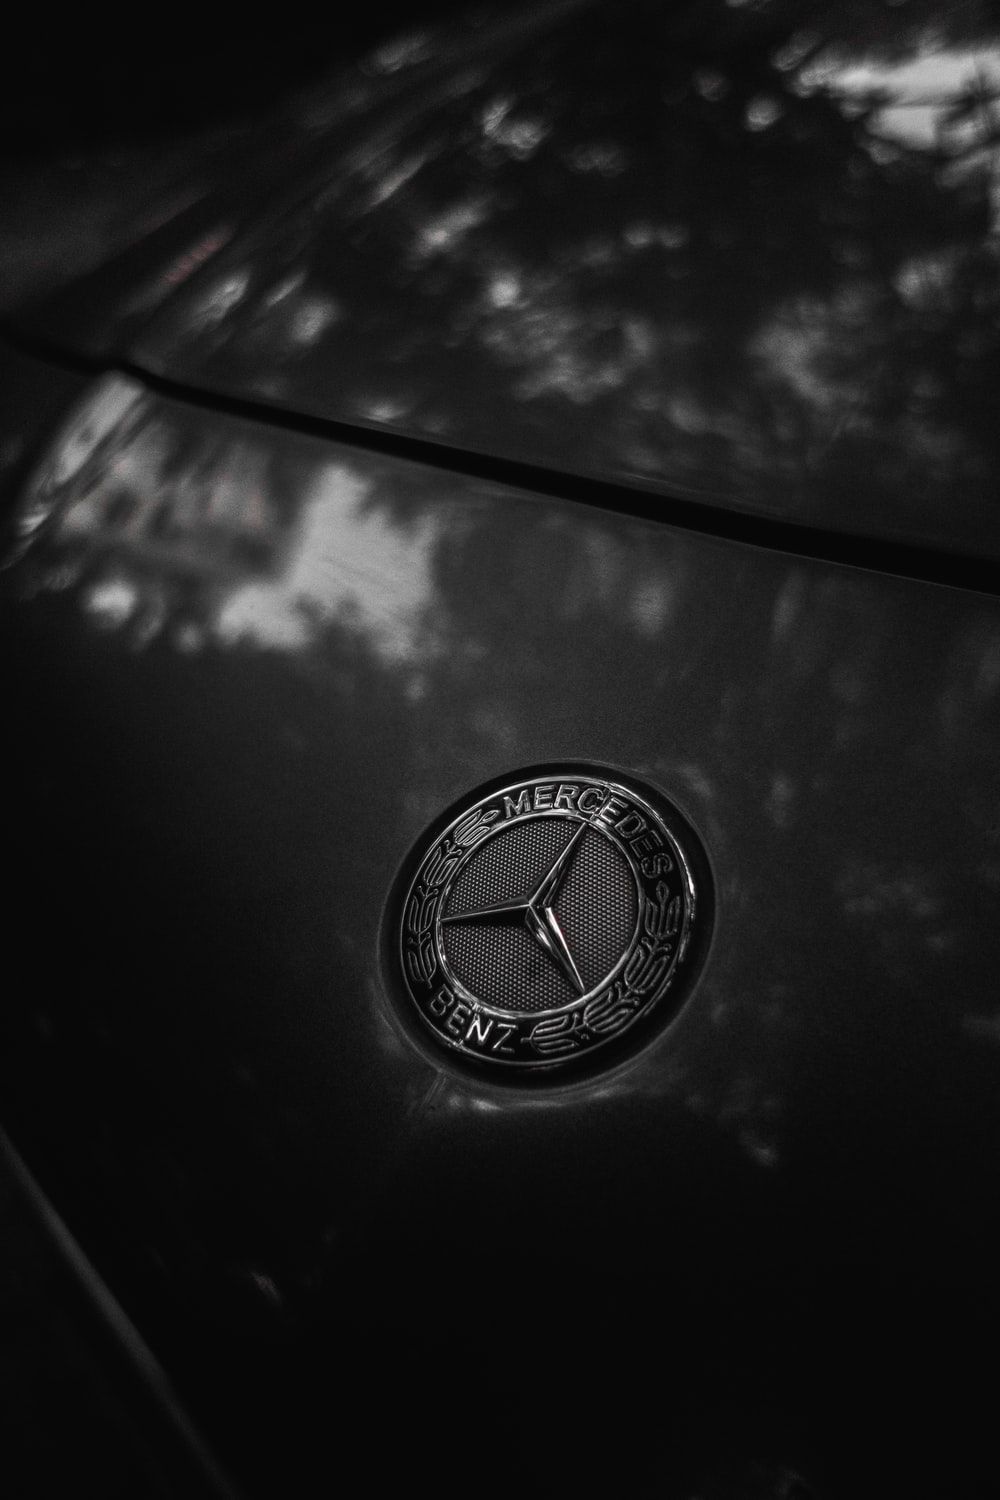 Mercedes Benz Picture. Download Free Image